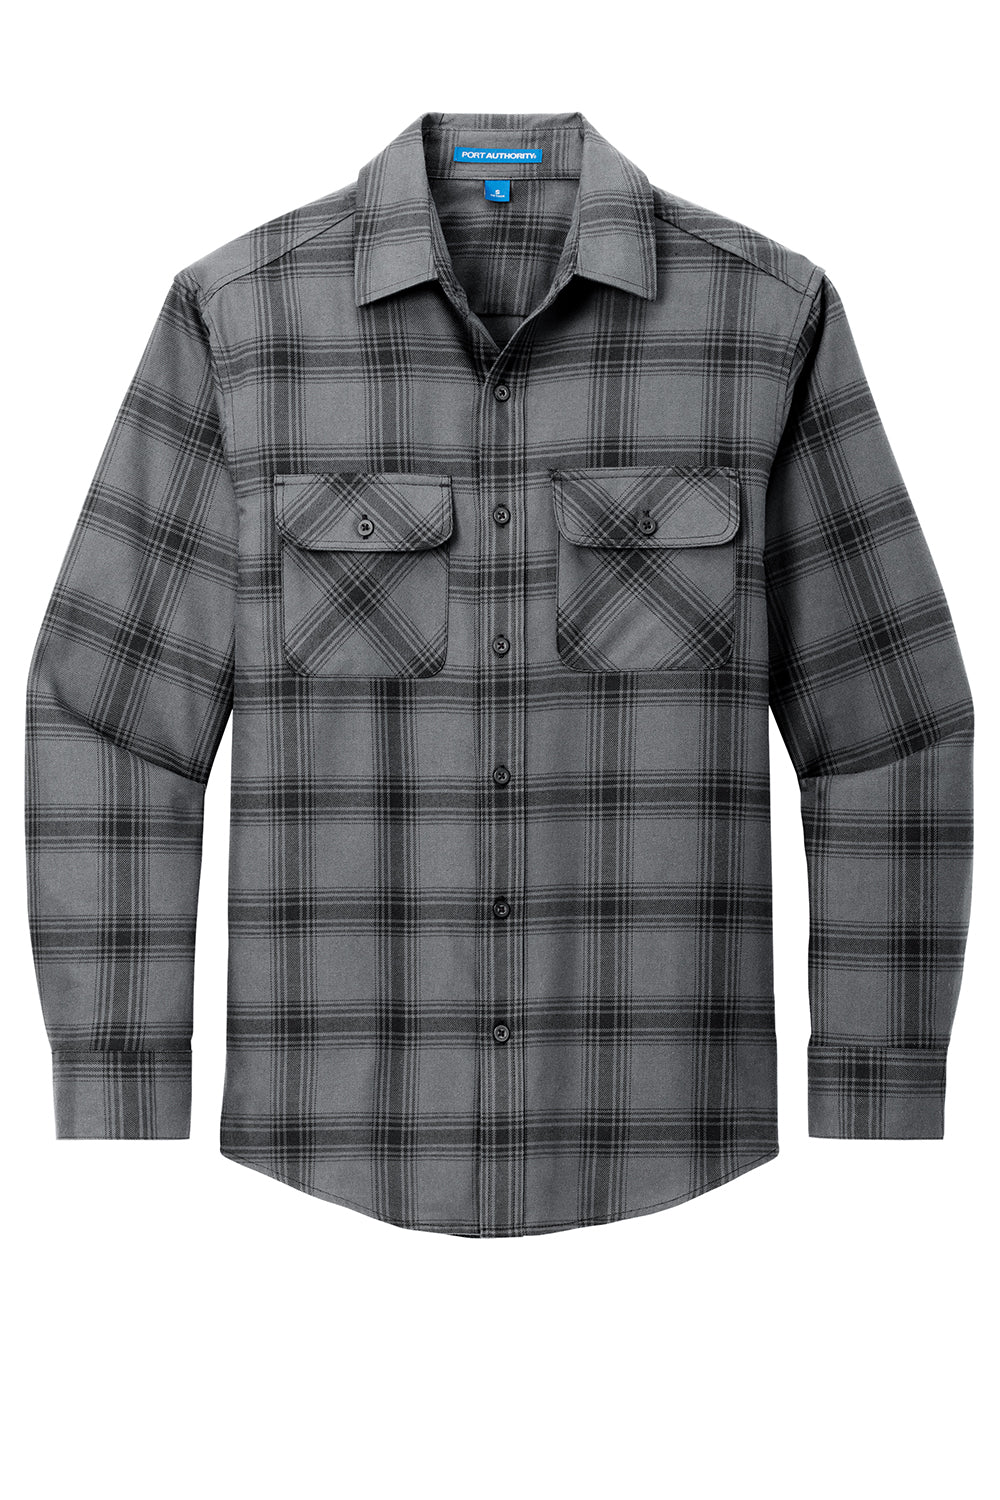 Port Authority W668 Mens Flannel Long Sleeve Button Down Shirt w/ Double Pockets Grey/Black Plaid Flat Front